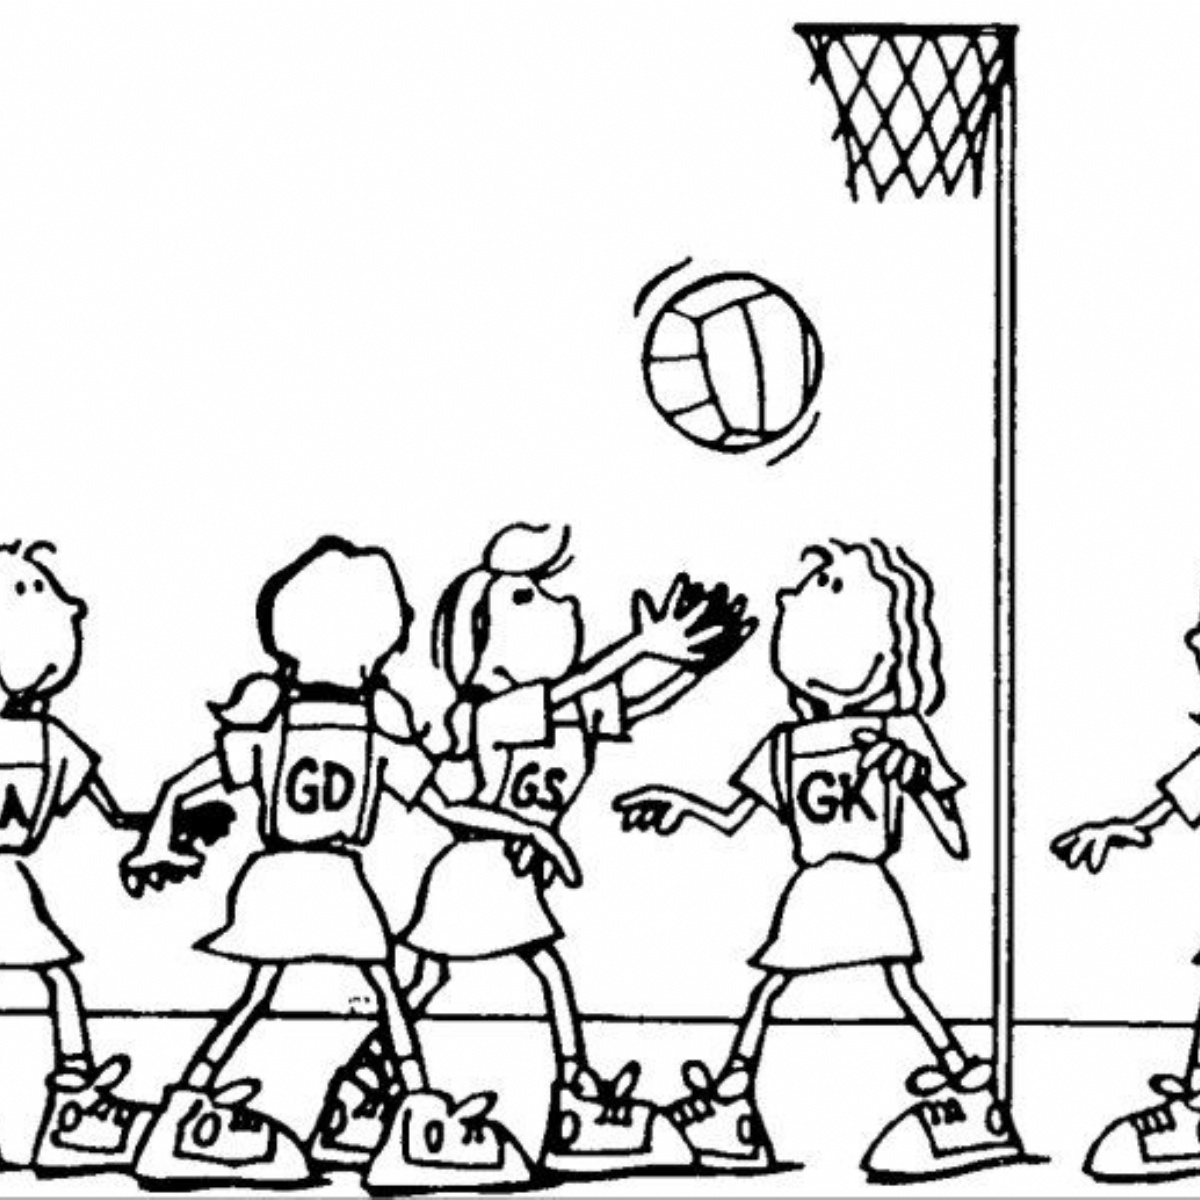 netball coloring pages